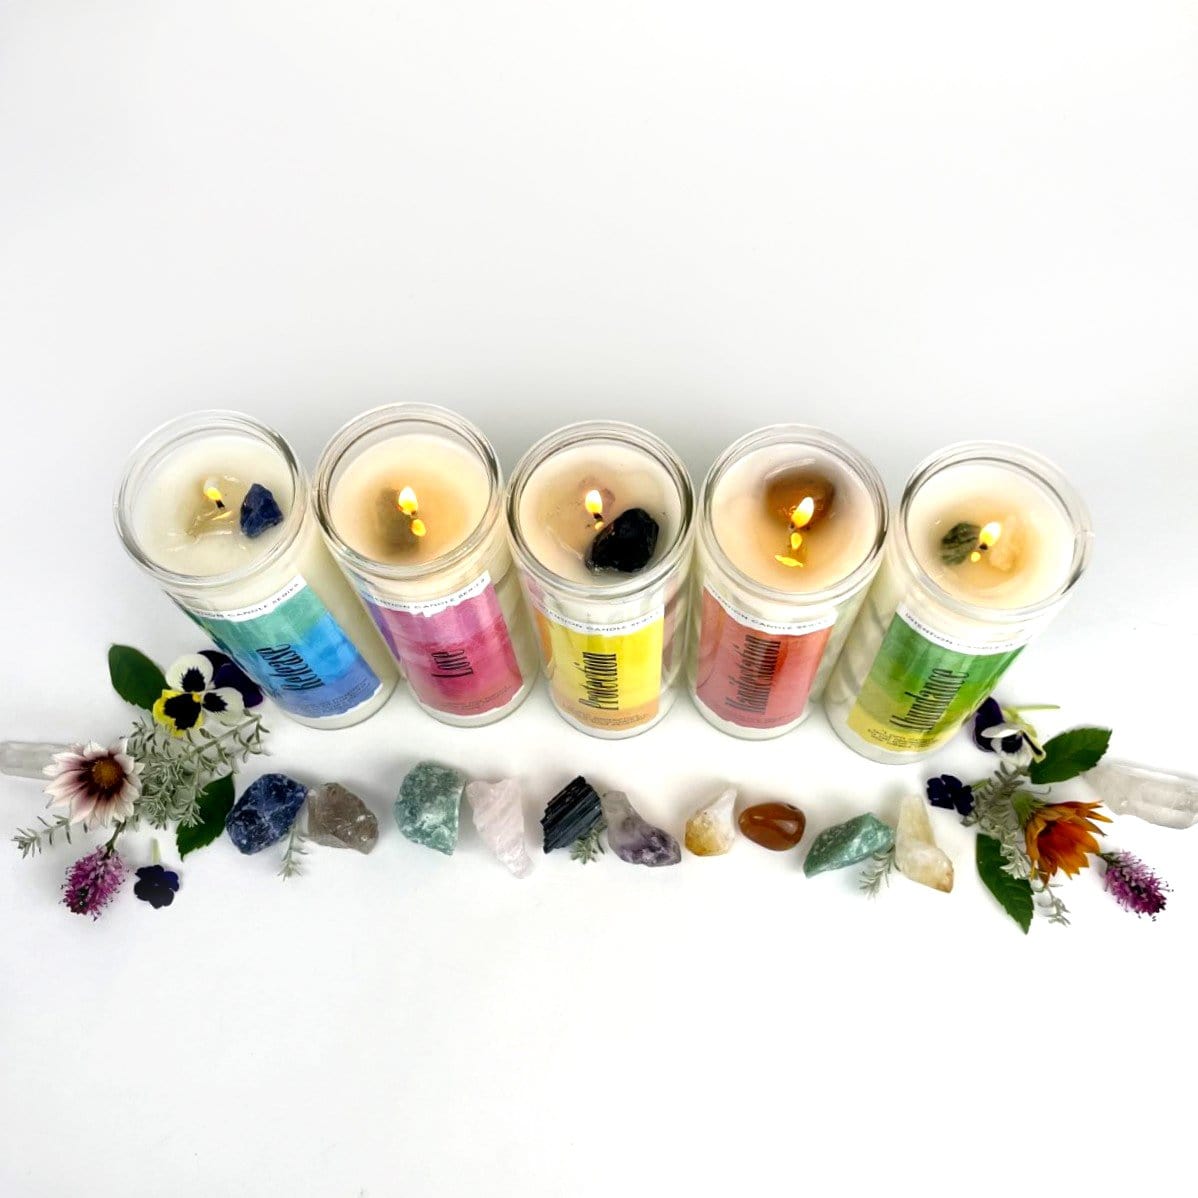 Different candles lined up surrounded by crystals and flowers on white background